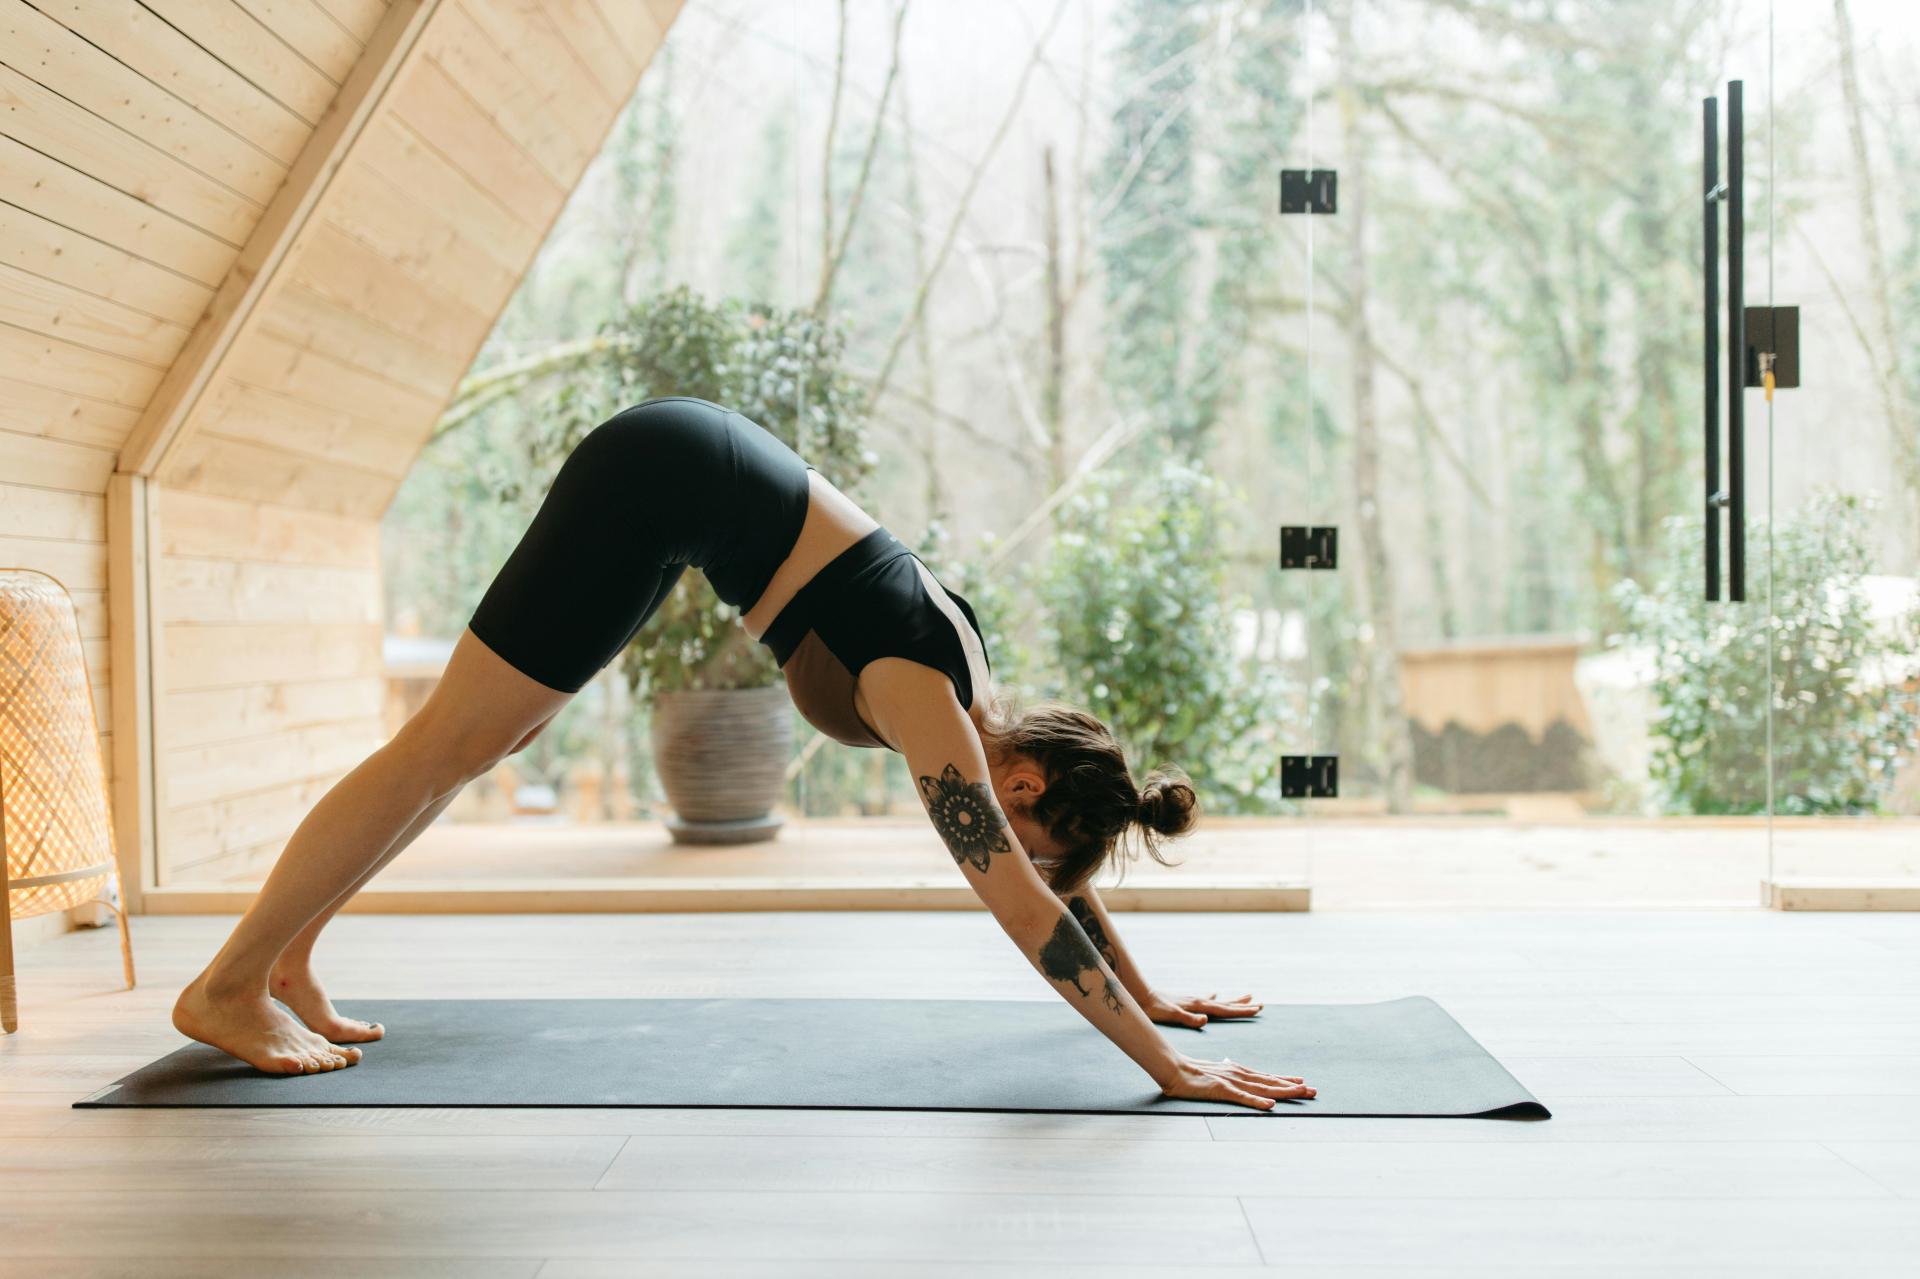 A woman engaged in a Pilates workout, performing a downward dog pose on a yoga mat inside a wooden studio with panoramic views of a forest